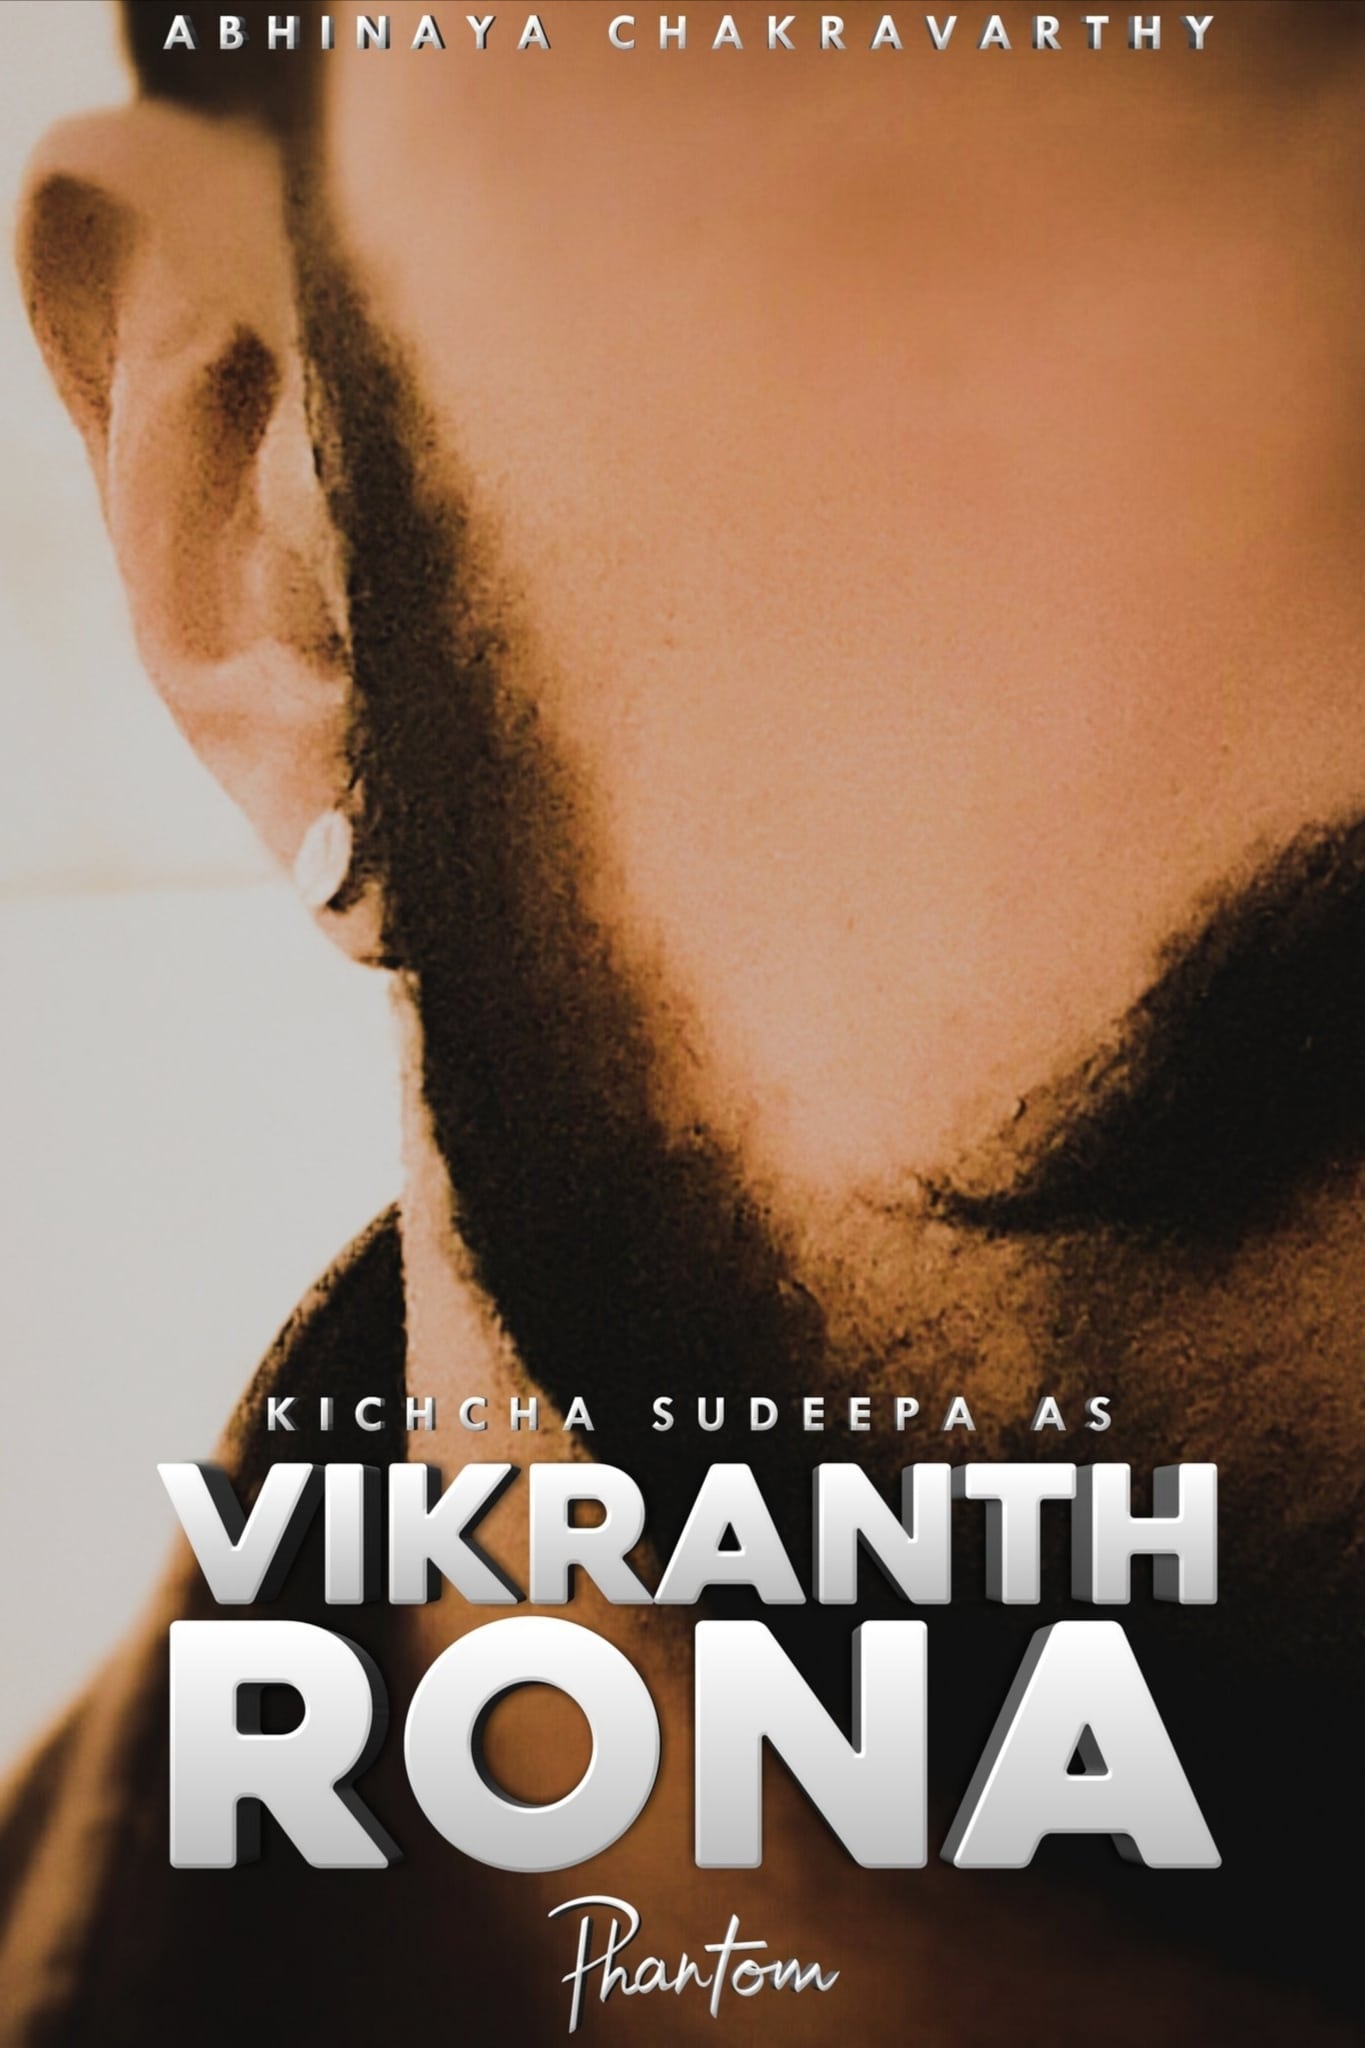 Poster for the movie "Vikrant Rona"